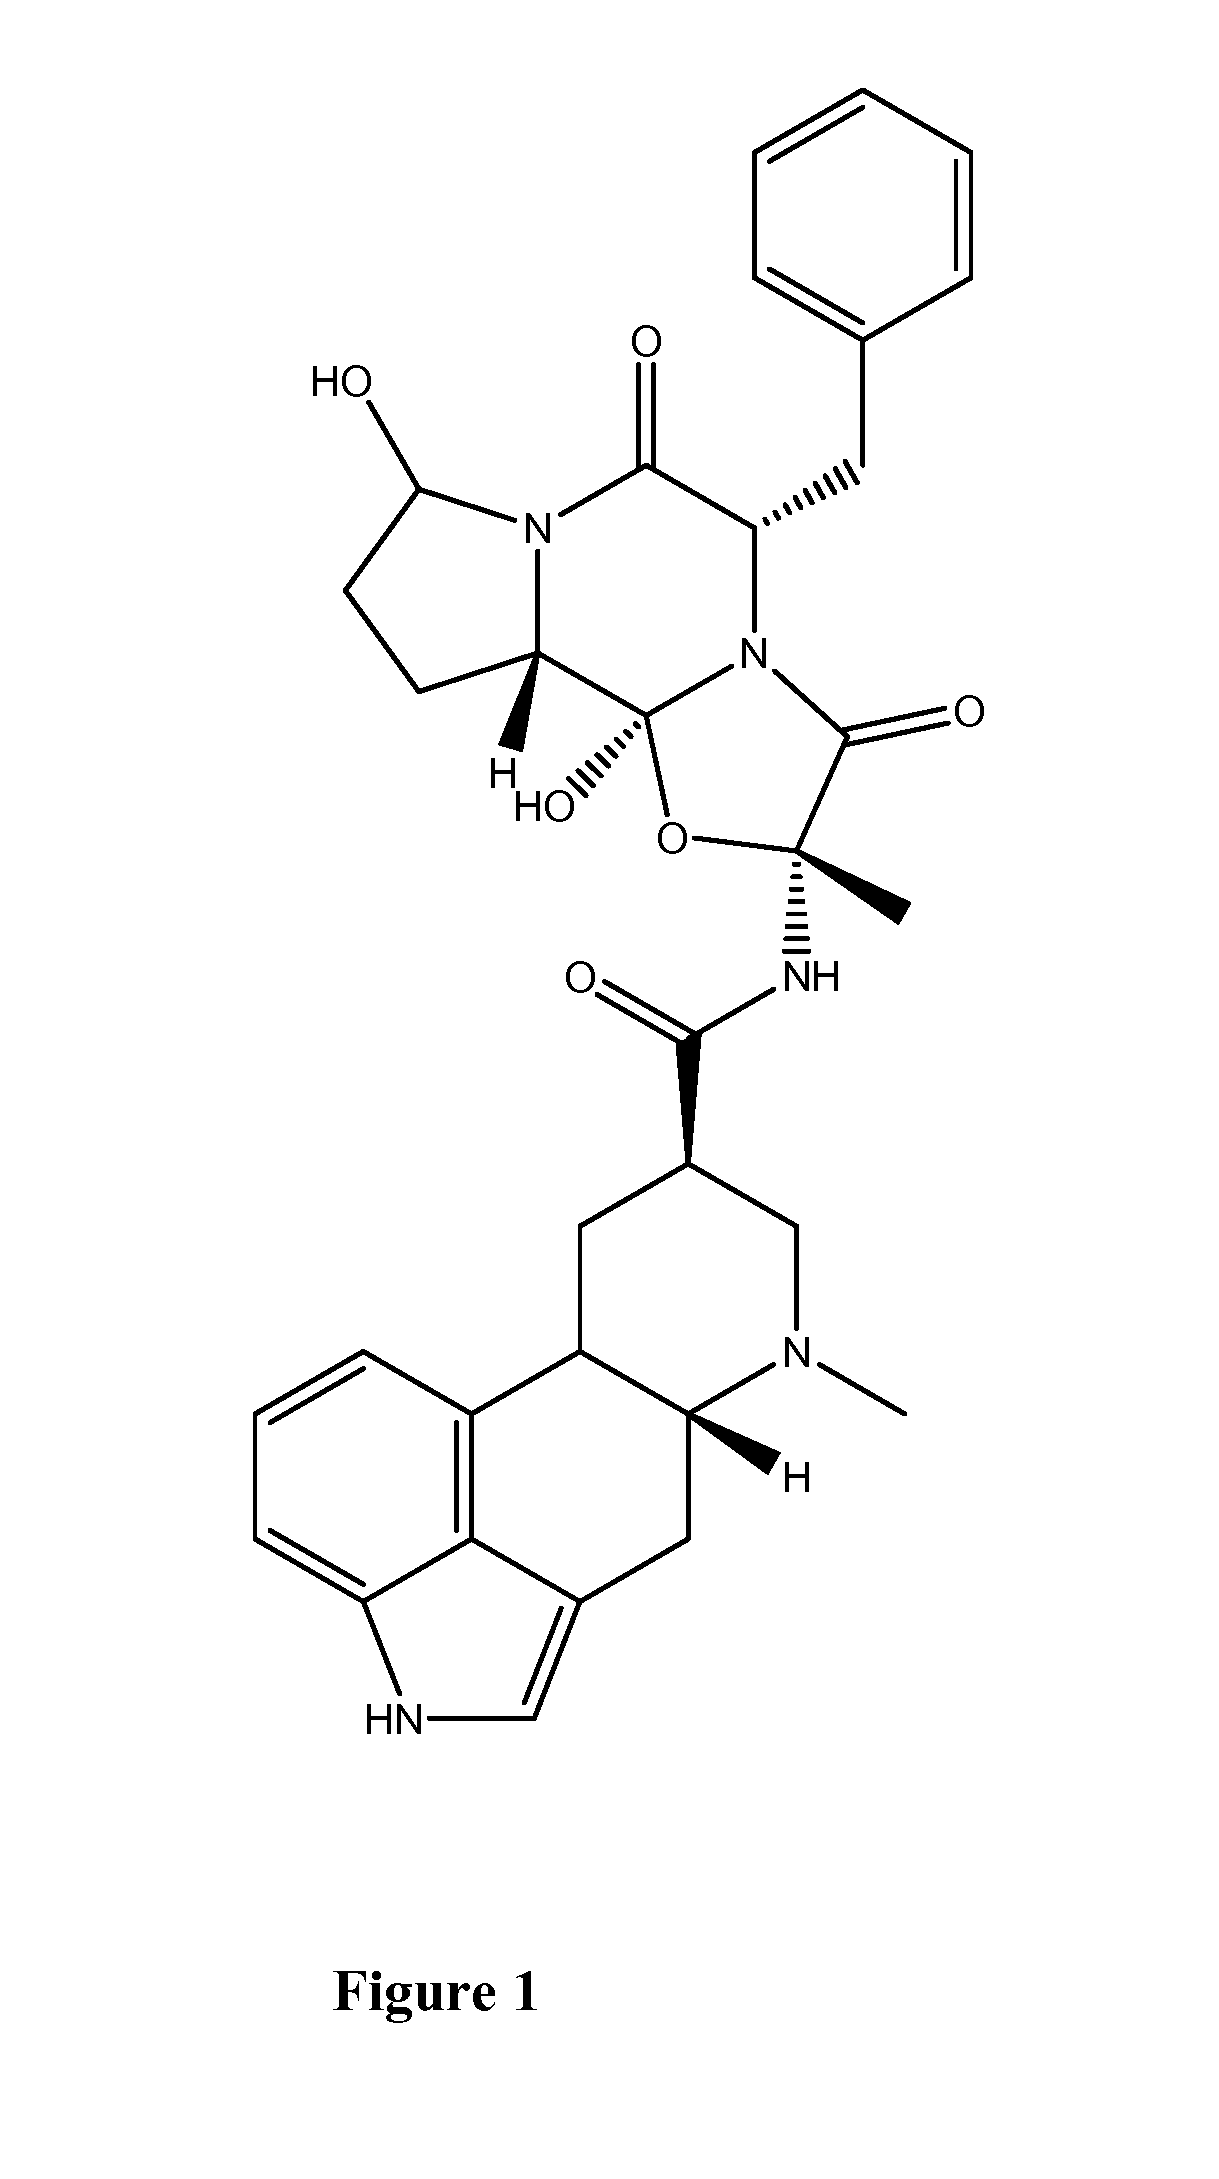 8'-hydroxy-dihydroergotamine compounds and compositions